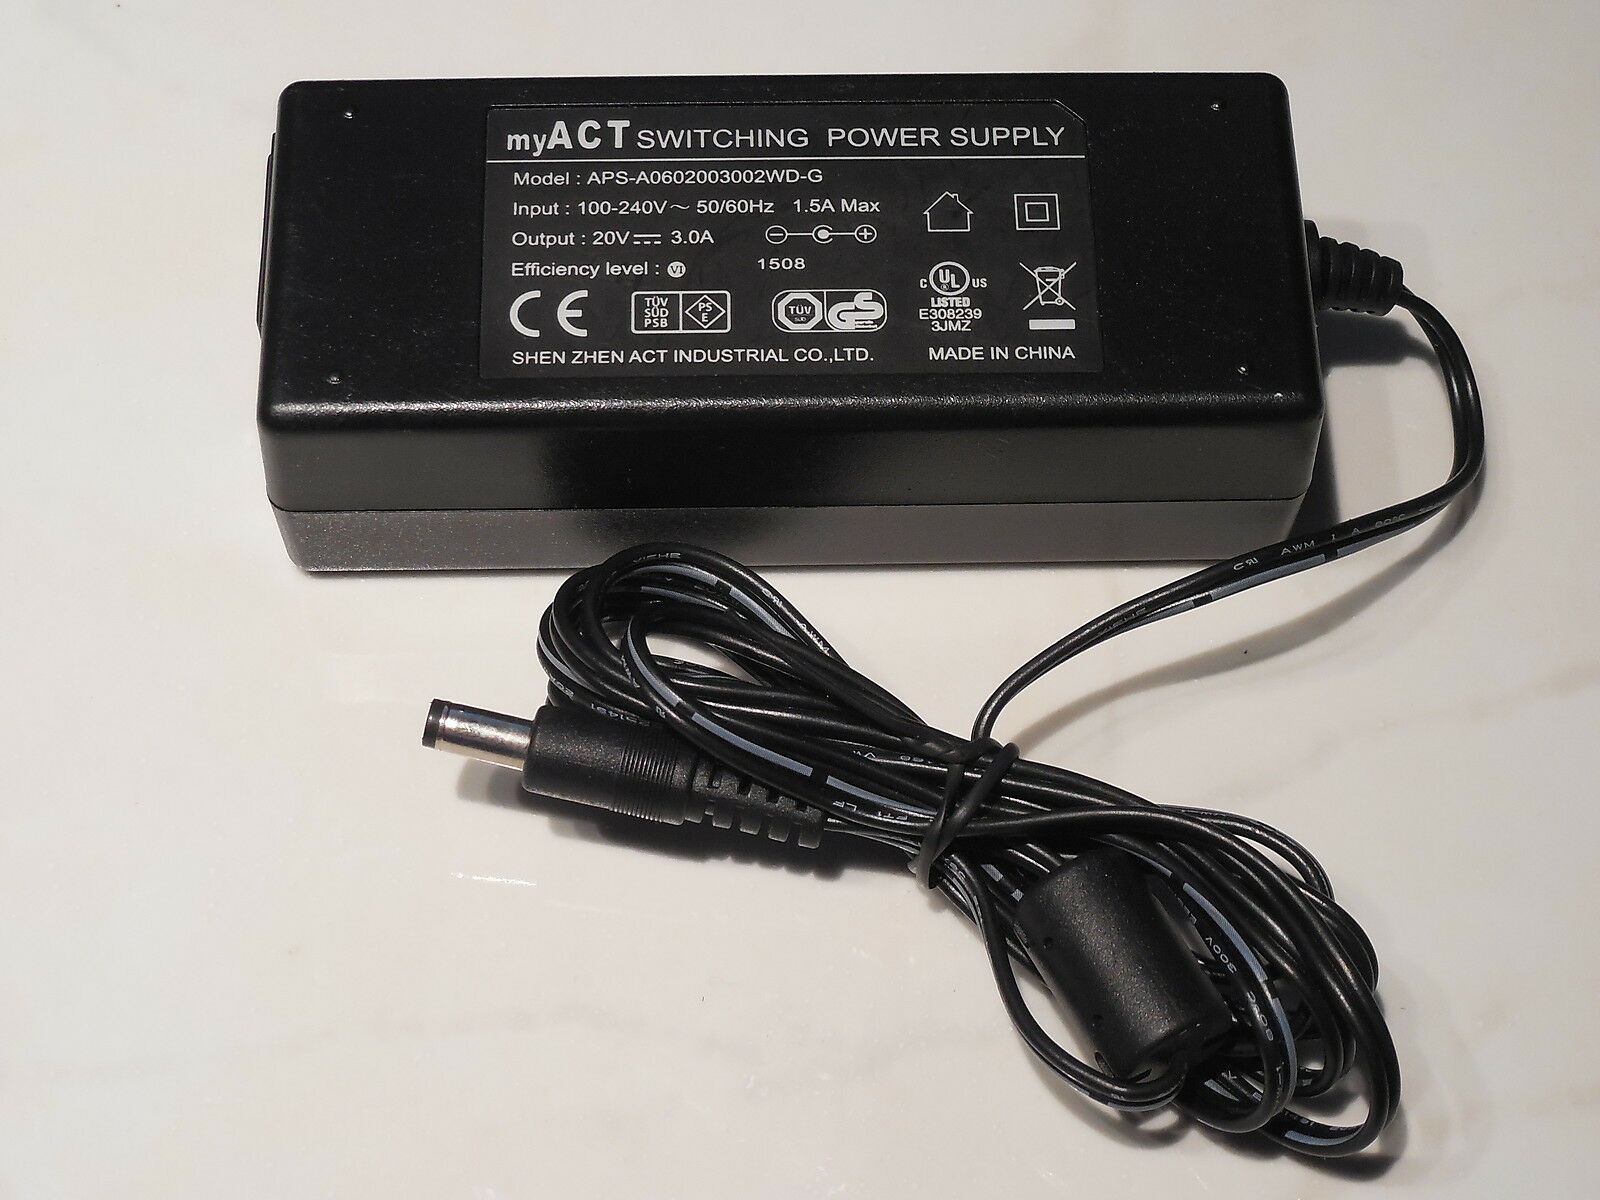 MYACT APS-A0602003002WD-G Ac Adapter Power Supply Cord Cable Charger Genuine Original